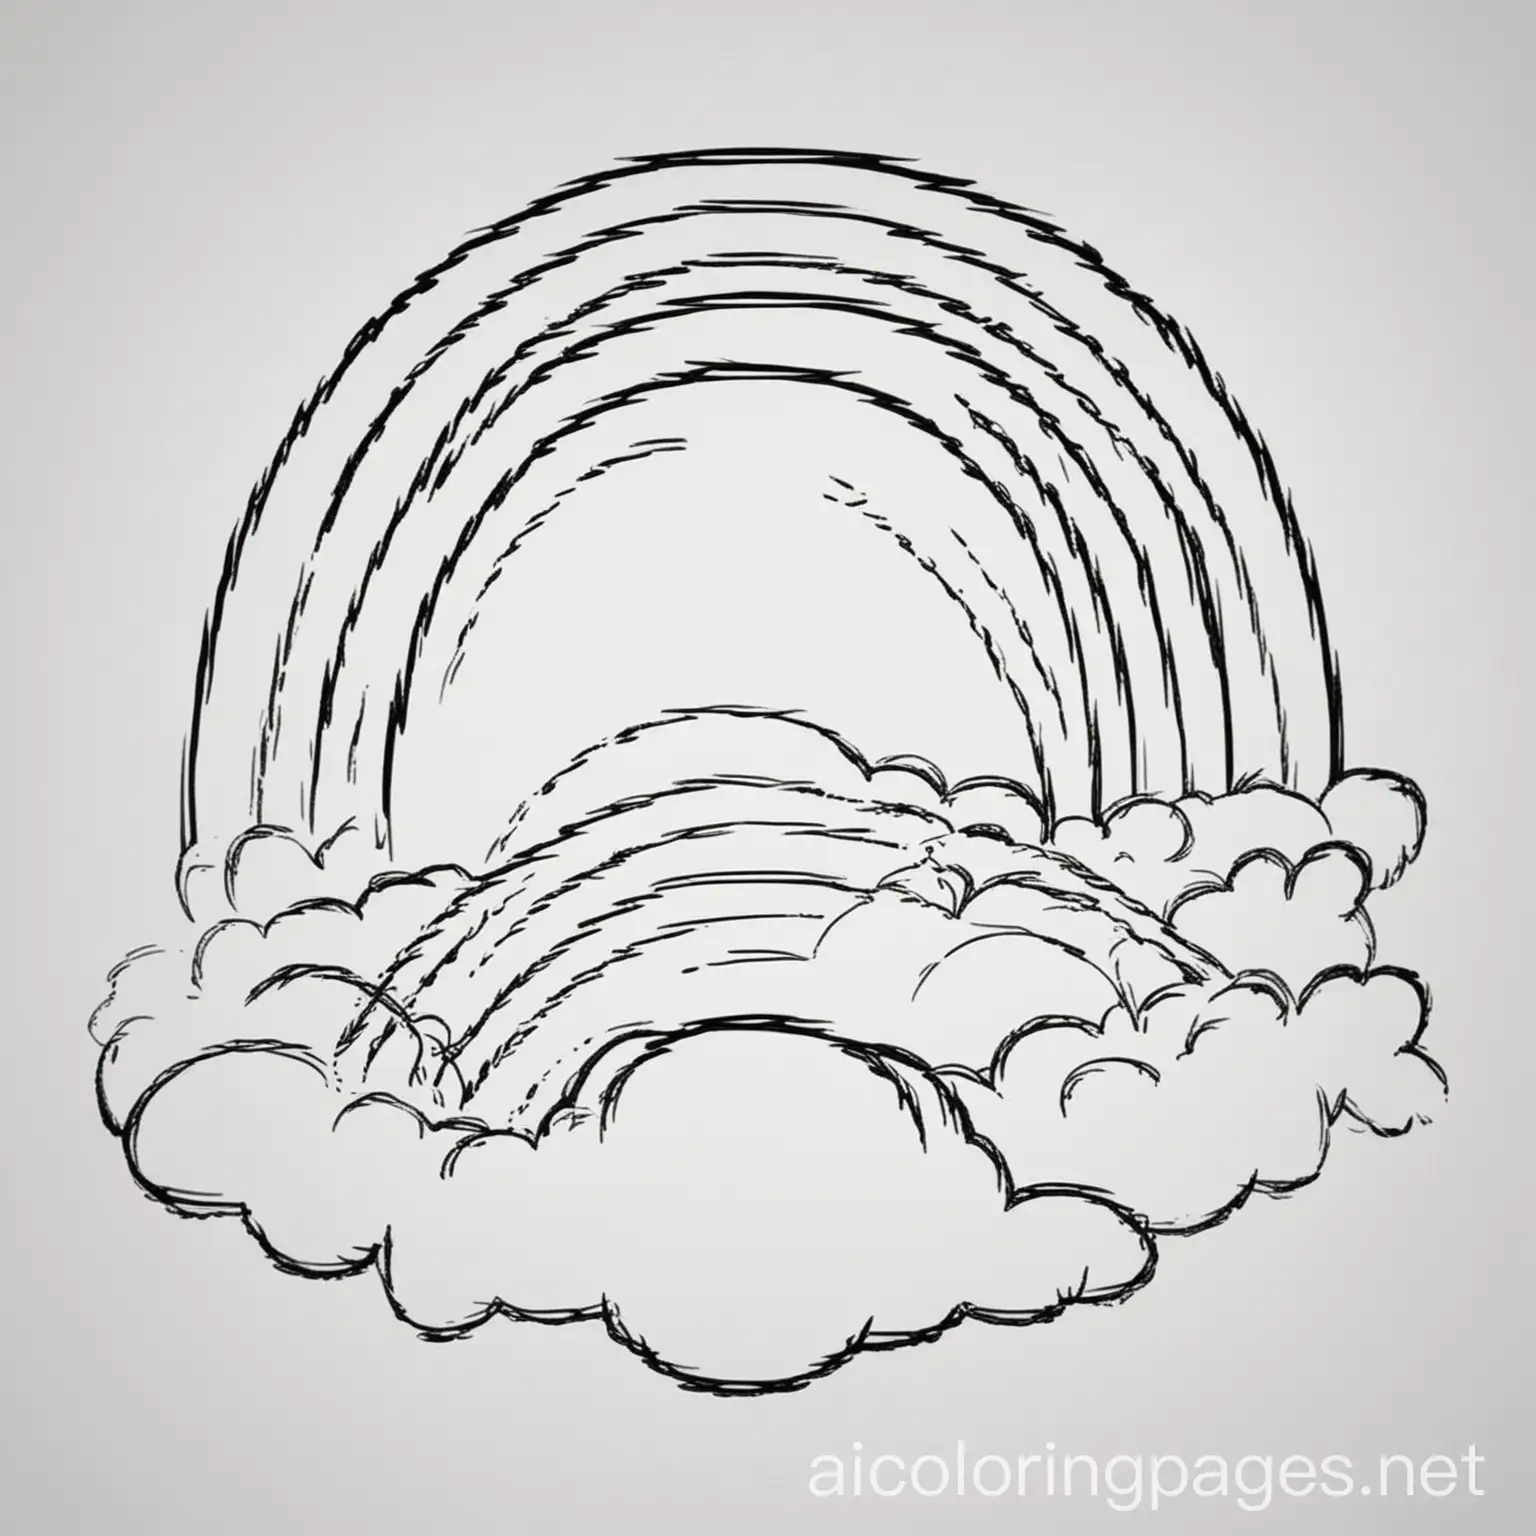 Simple-Cartoon-Rainbow-Coloring-Page-on-White-Background